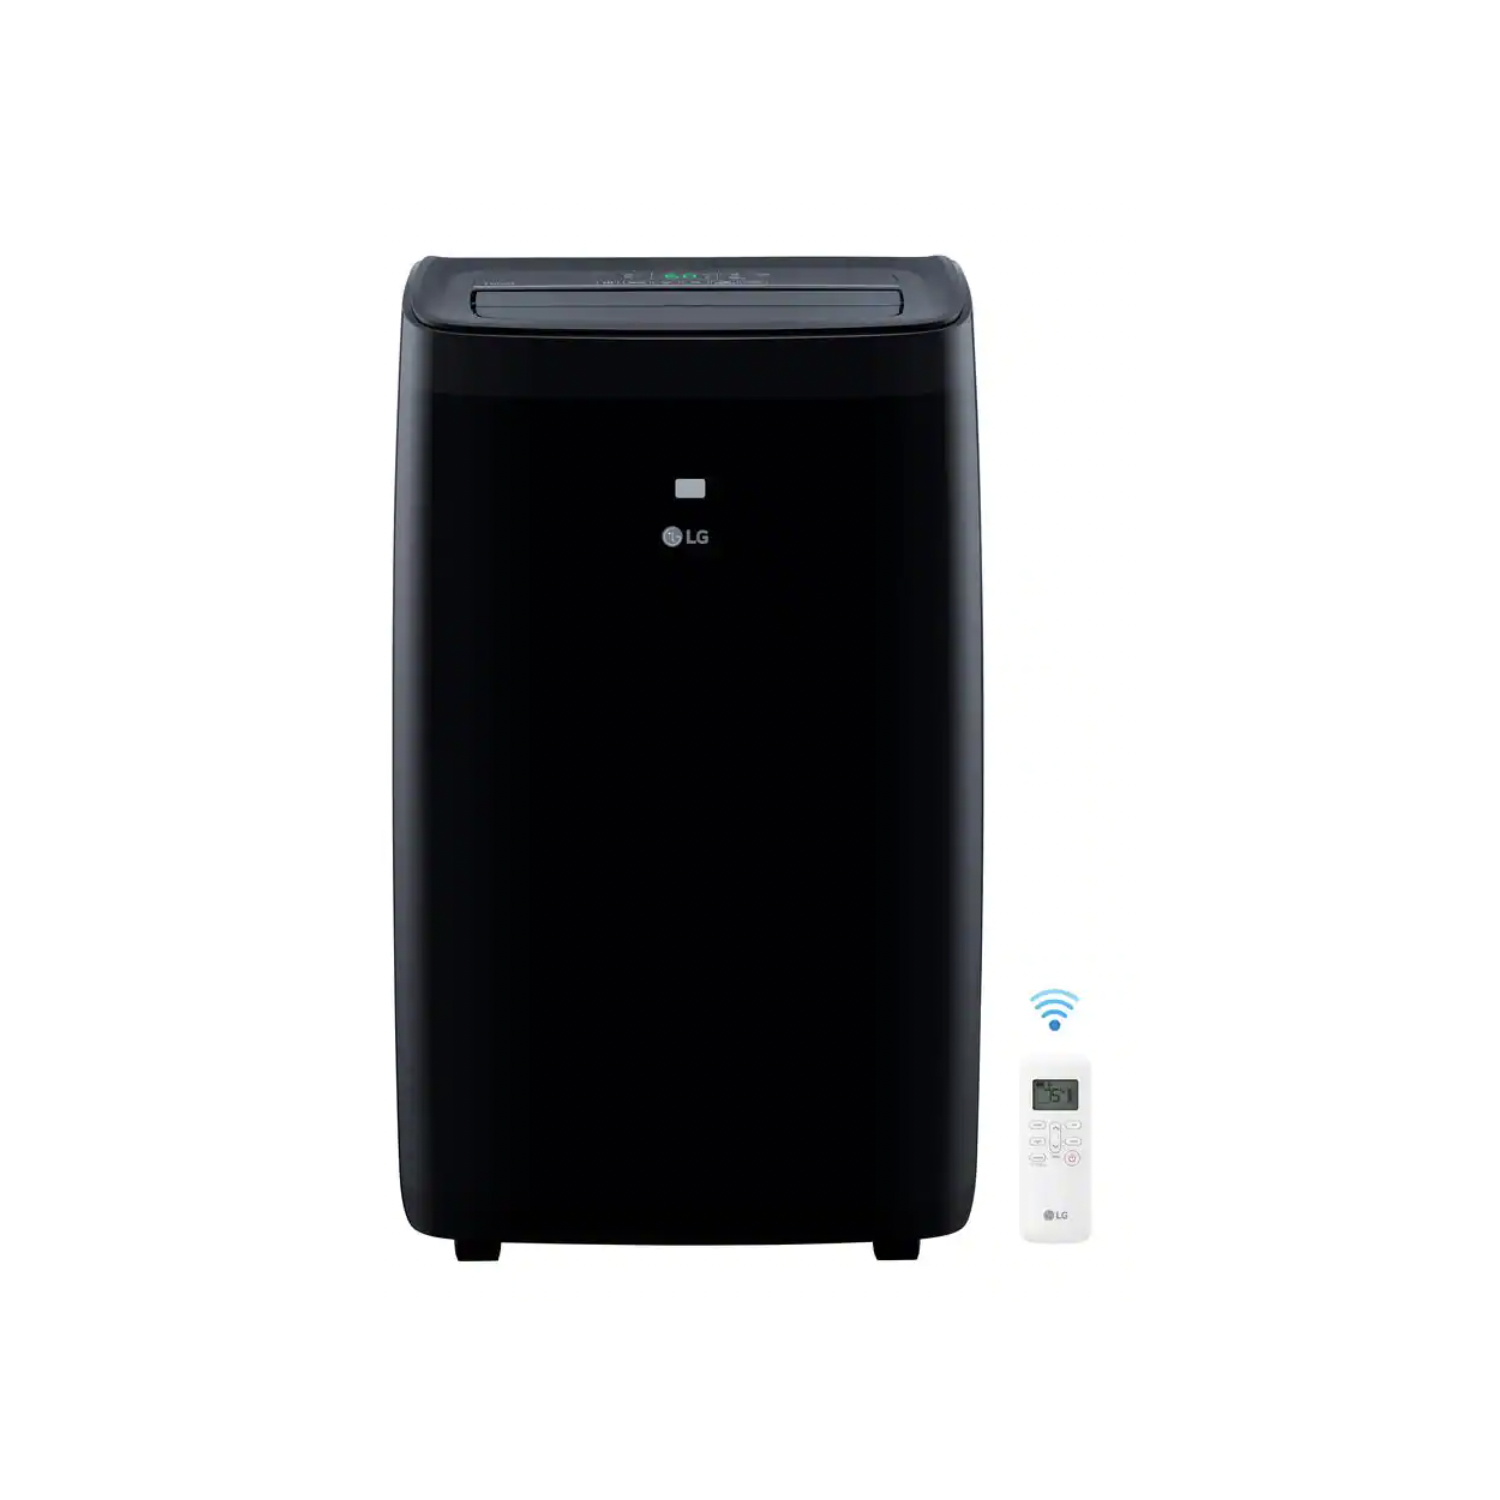 LG 12,000 BTU (10,000 DOE) 115-Volt Portable Air Conditioner Cools 450 Sq Ft with Dehumidifier Function, Wi-Fi Enabled (LP1021BSSM)